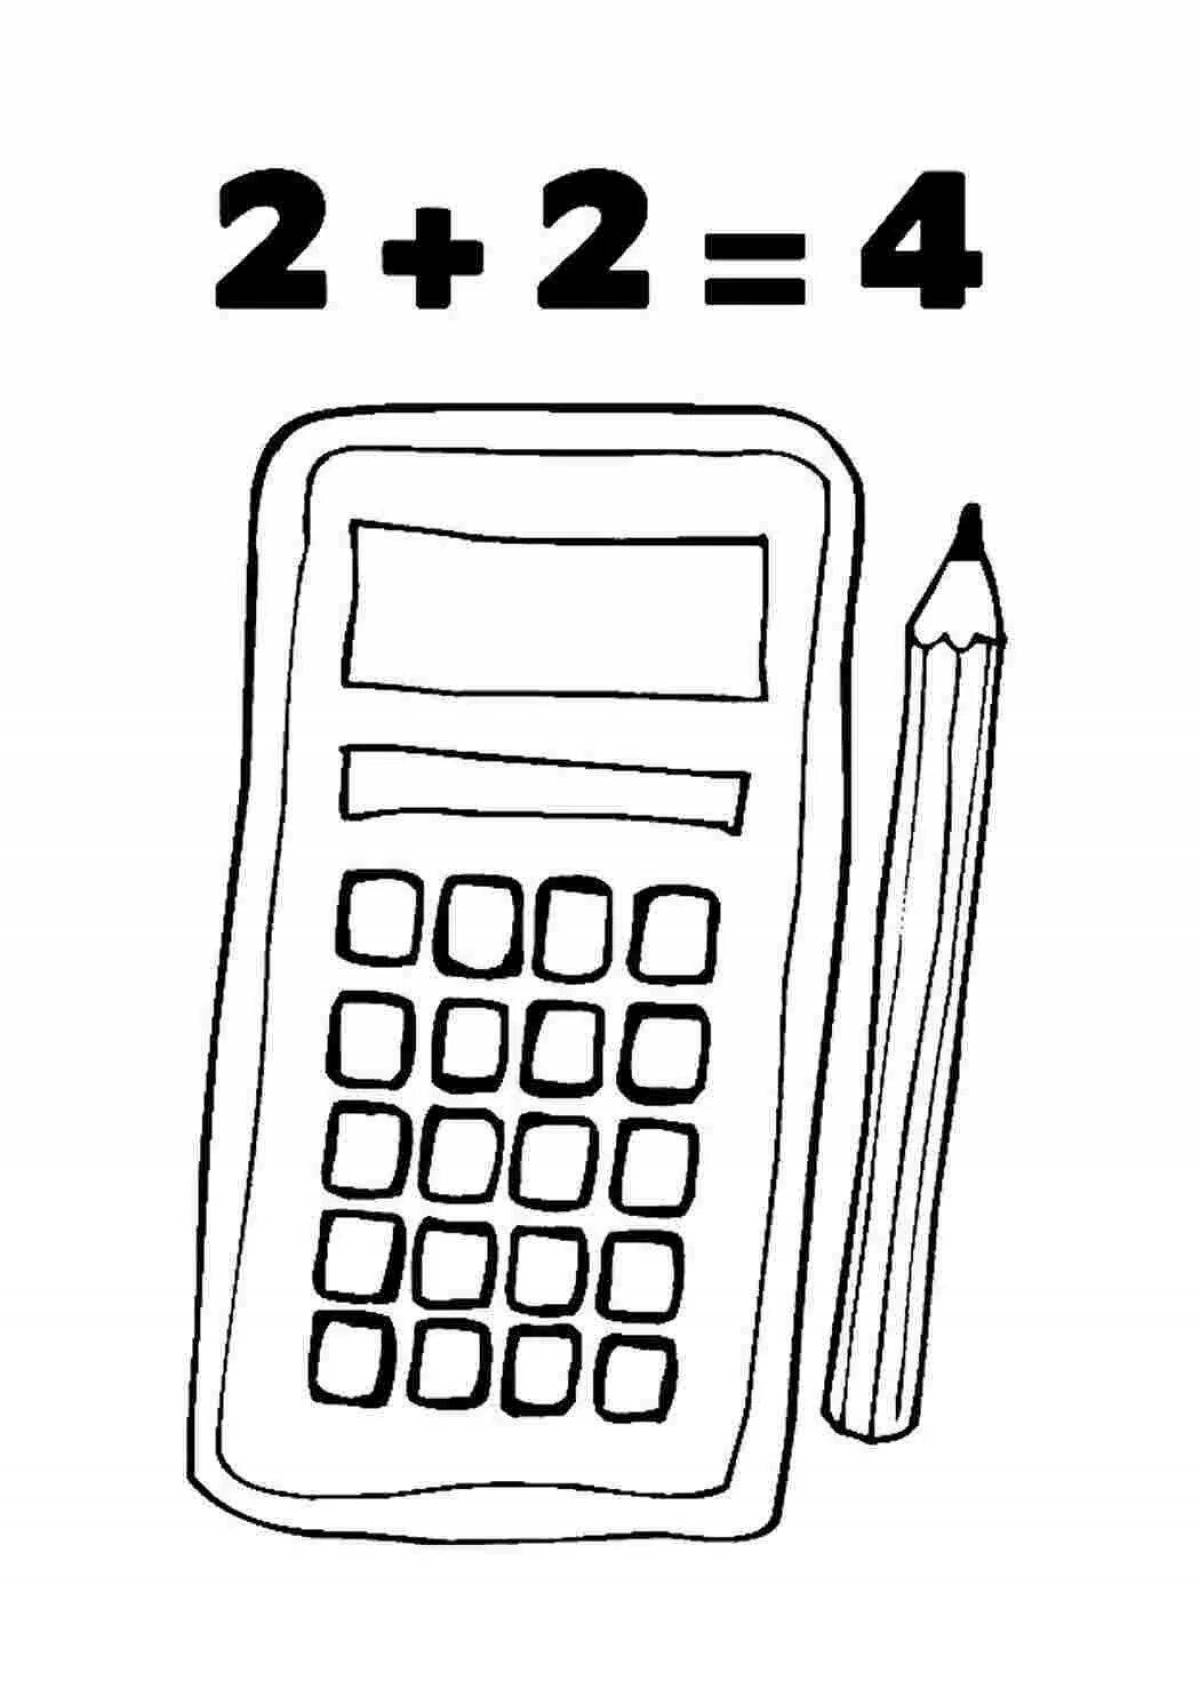 Calculator coloring page with a riot of colors